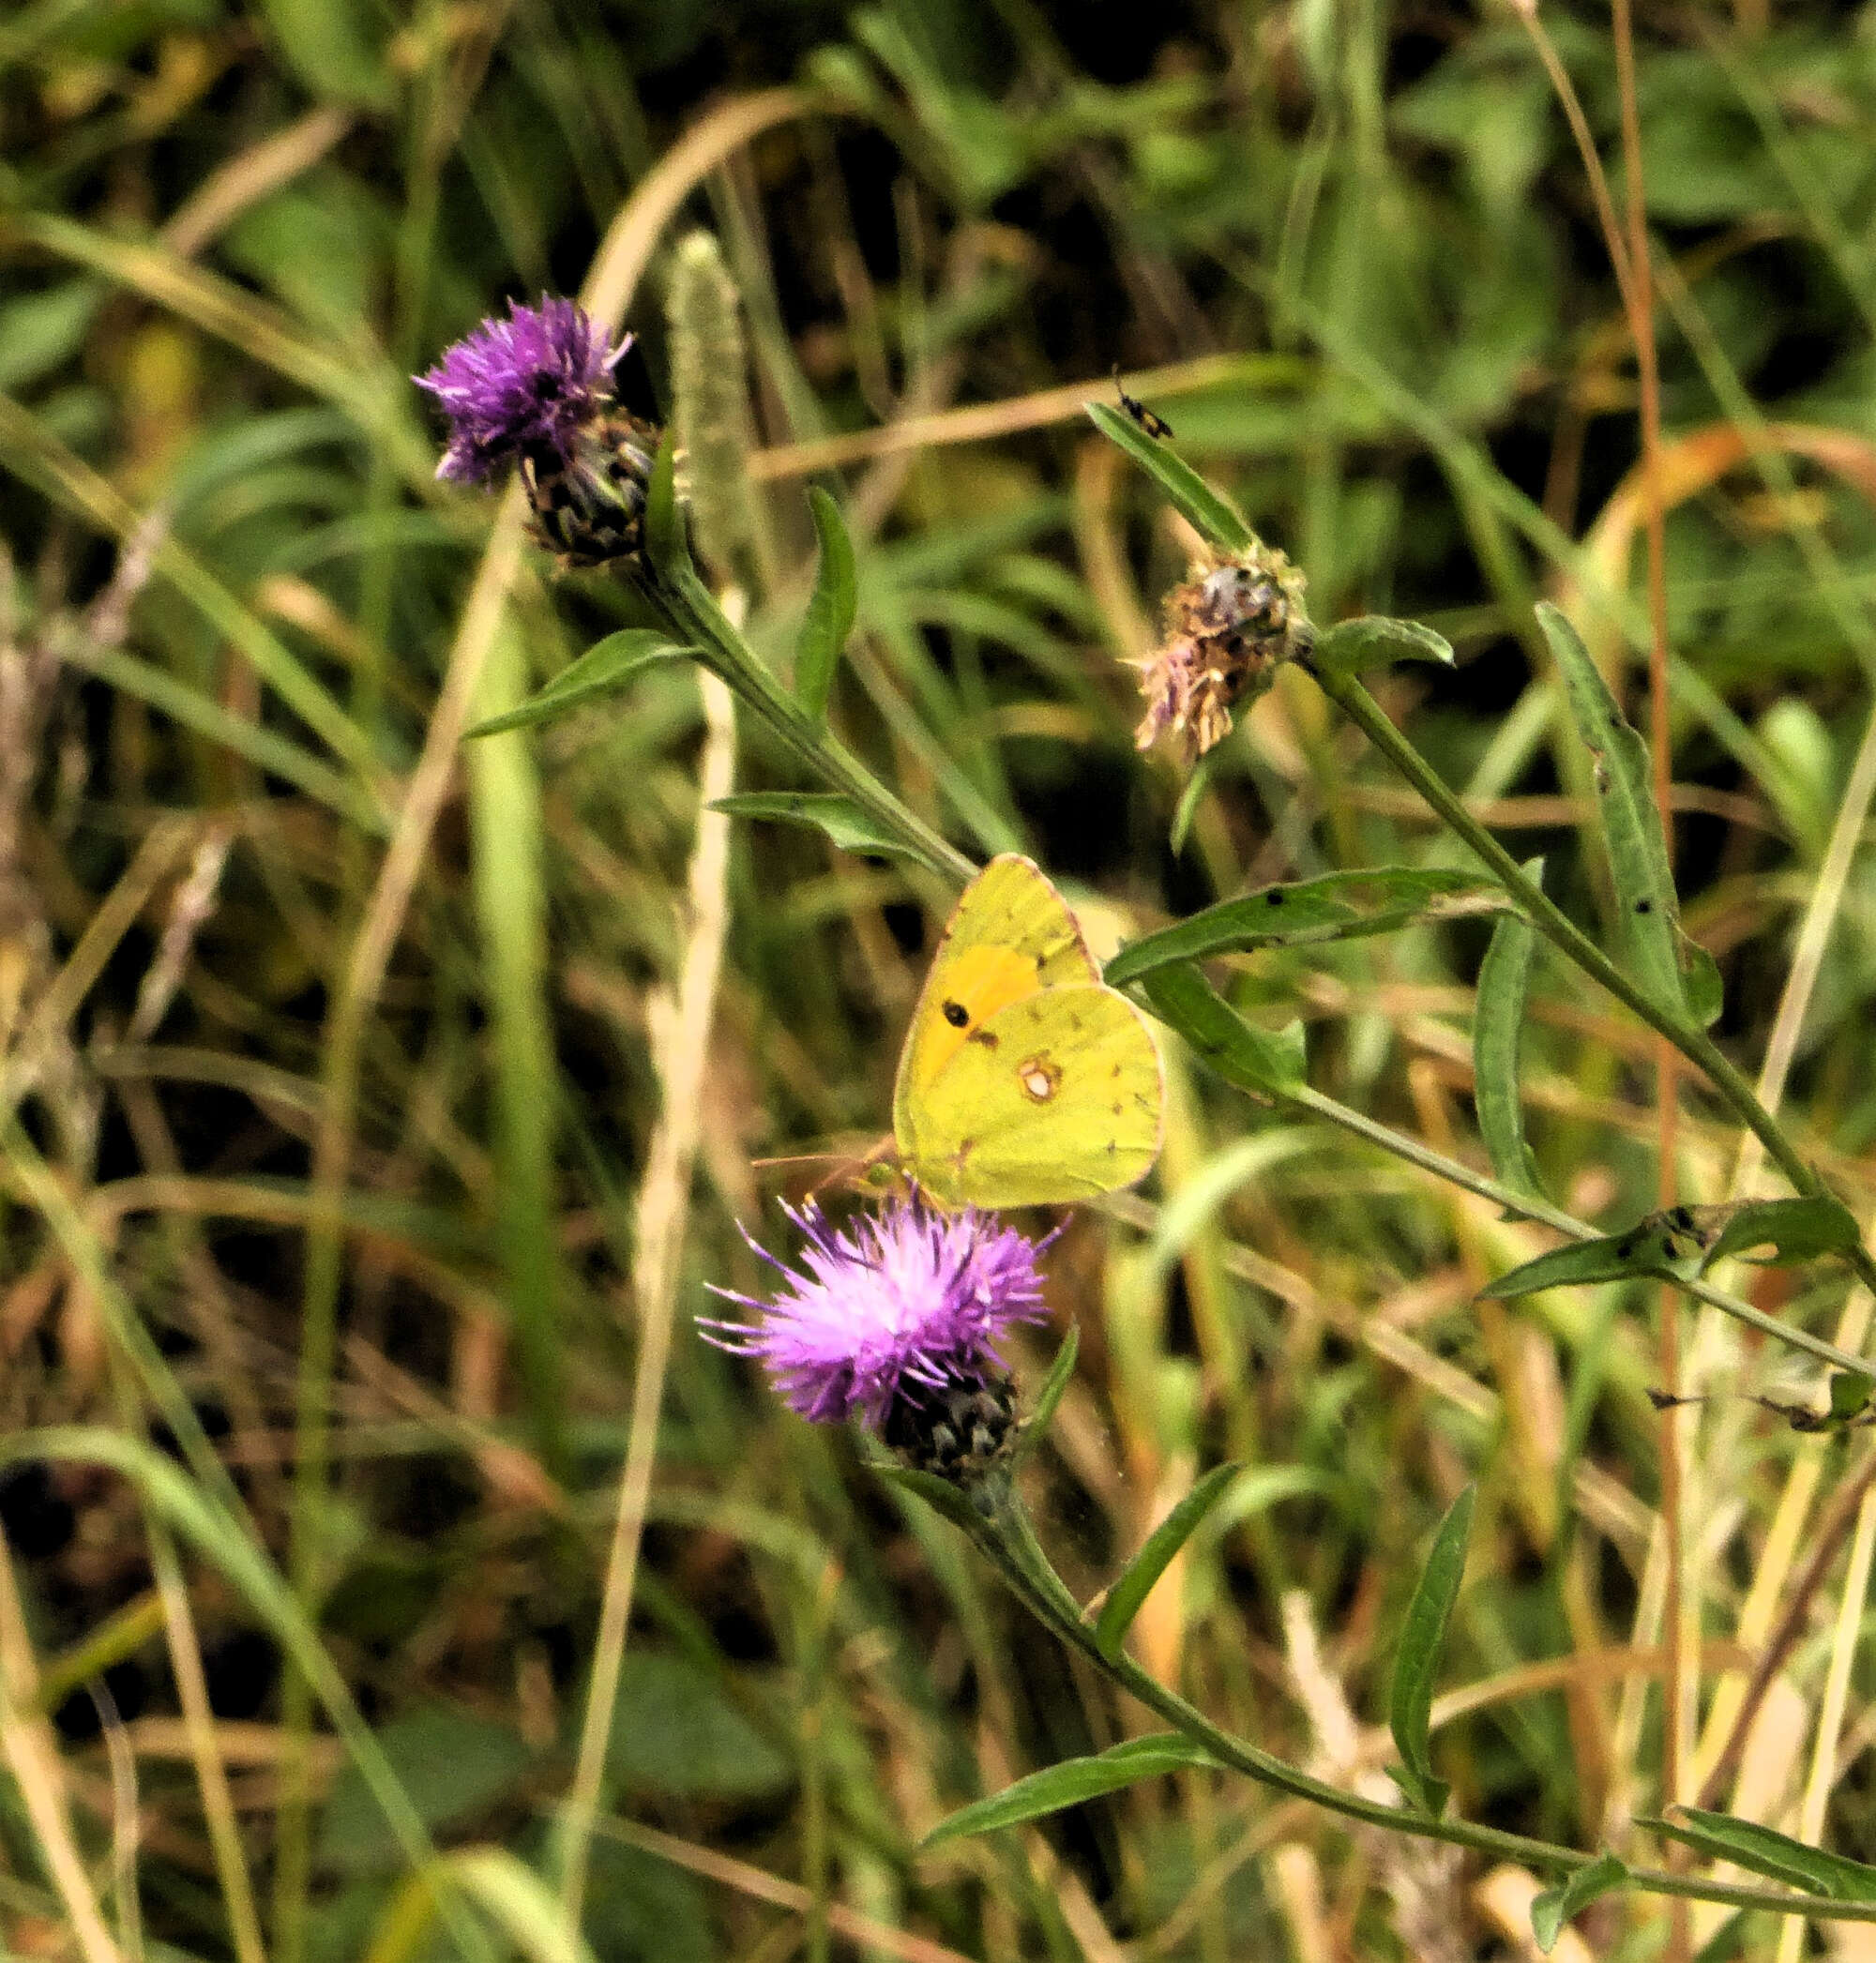 A total of 6 Clouded Yellows were seen this year, it still remains our best year for this uncommon migrant.